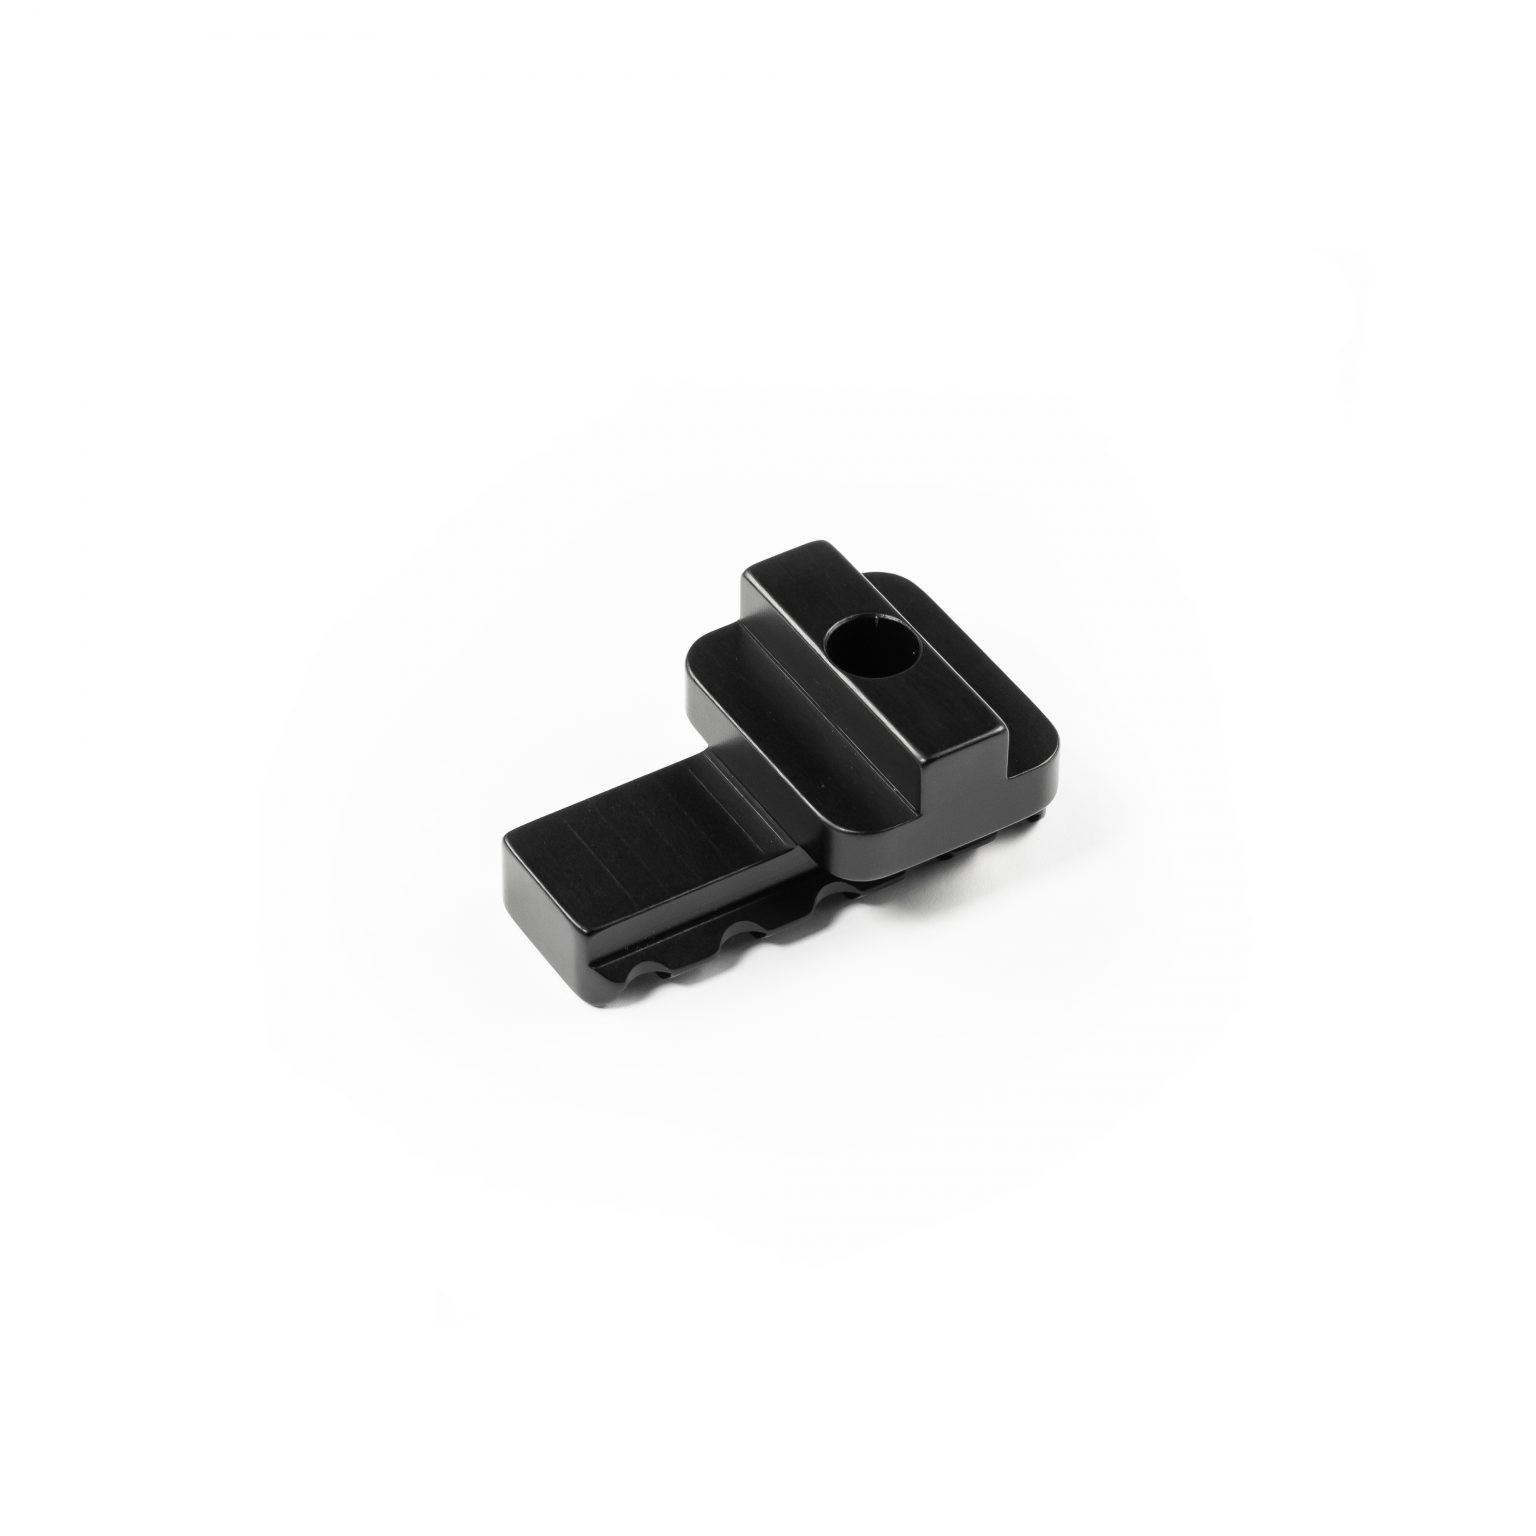 Picatinny Rail Adapter for Manners Barricade Mini-Chassis – Area 419